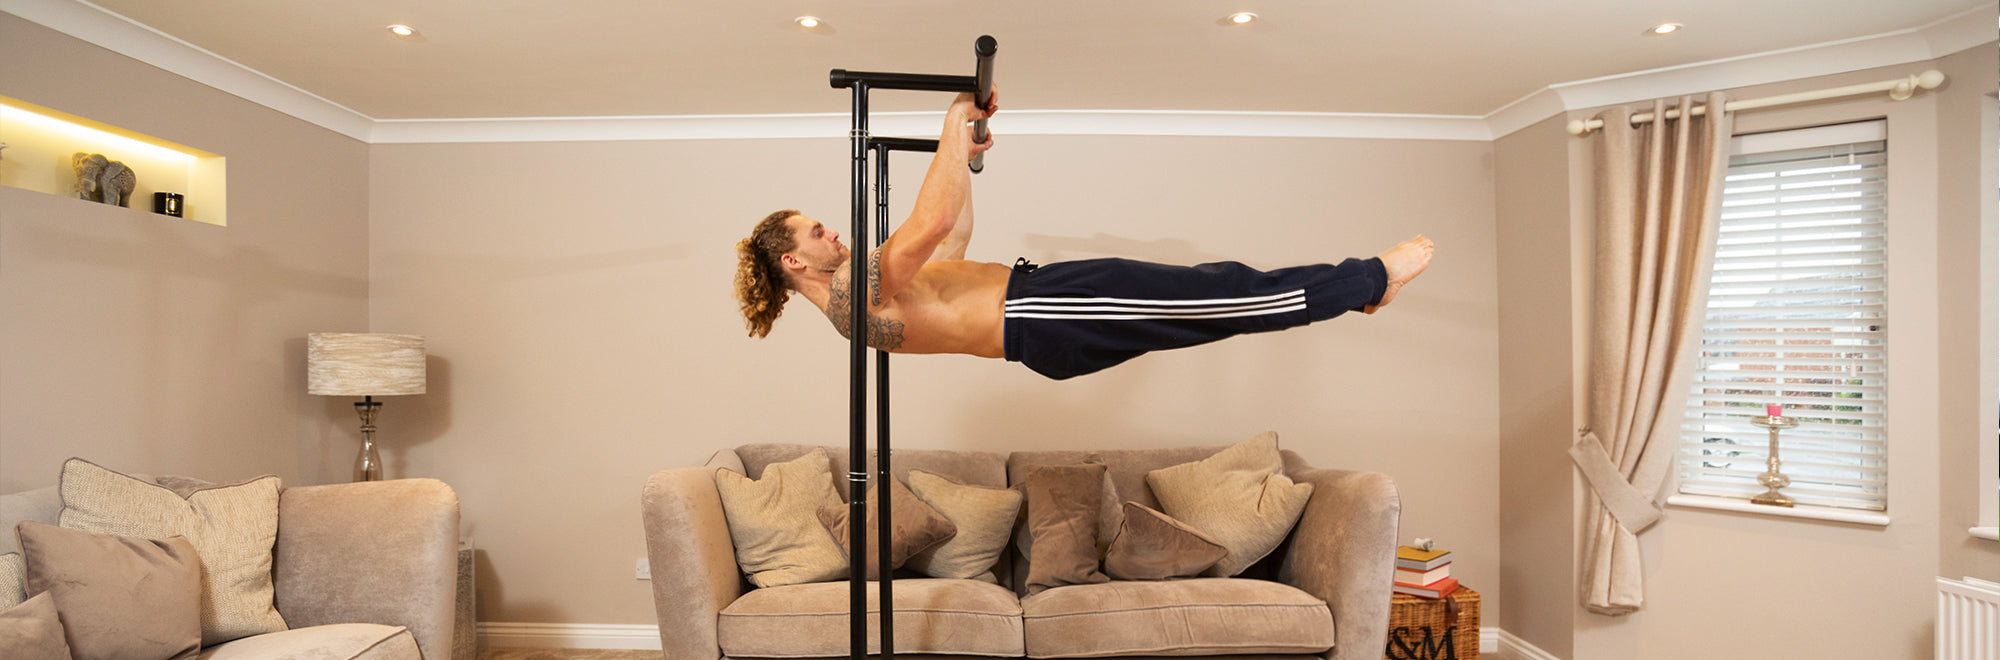 7 Exercises To Master Using Your Portable Pull Up Rack - Gravity Fitness  Equipment